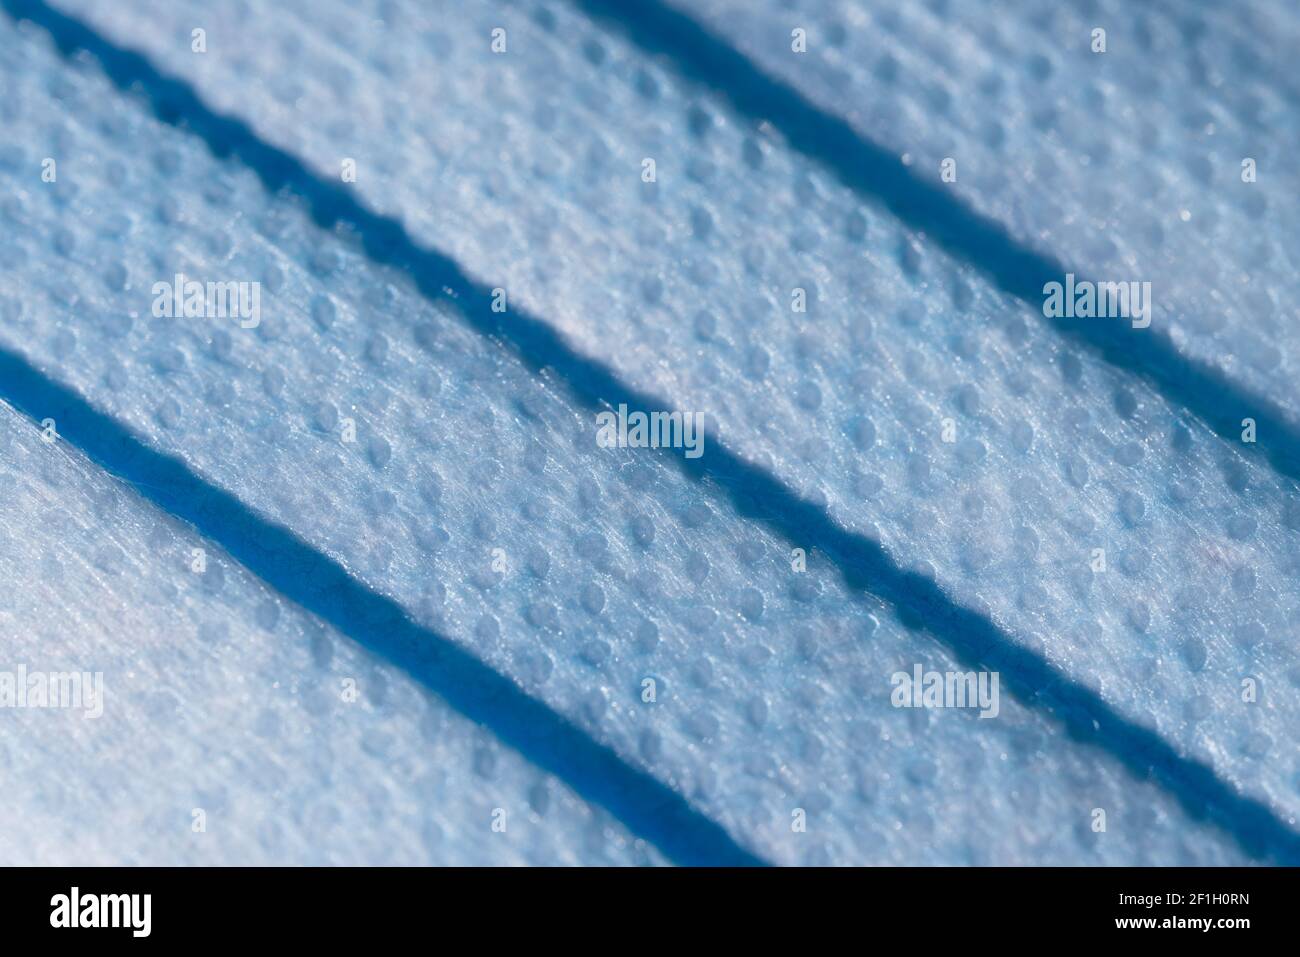 Blue doctors face mask used for coronavirus or covid forms a full frame background texture. Dimpled blue surface and microscopic fiber material detail Stock Photo